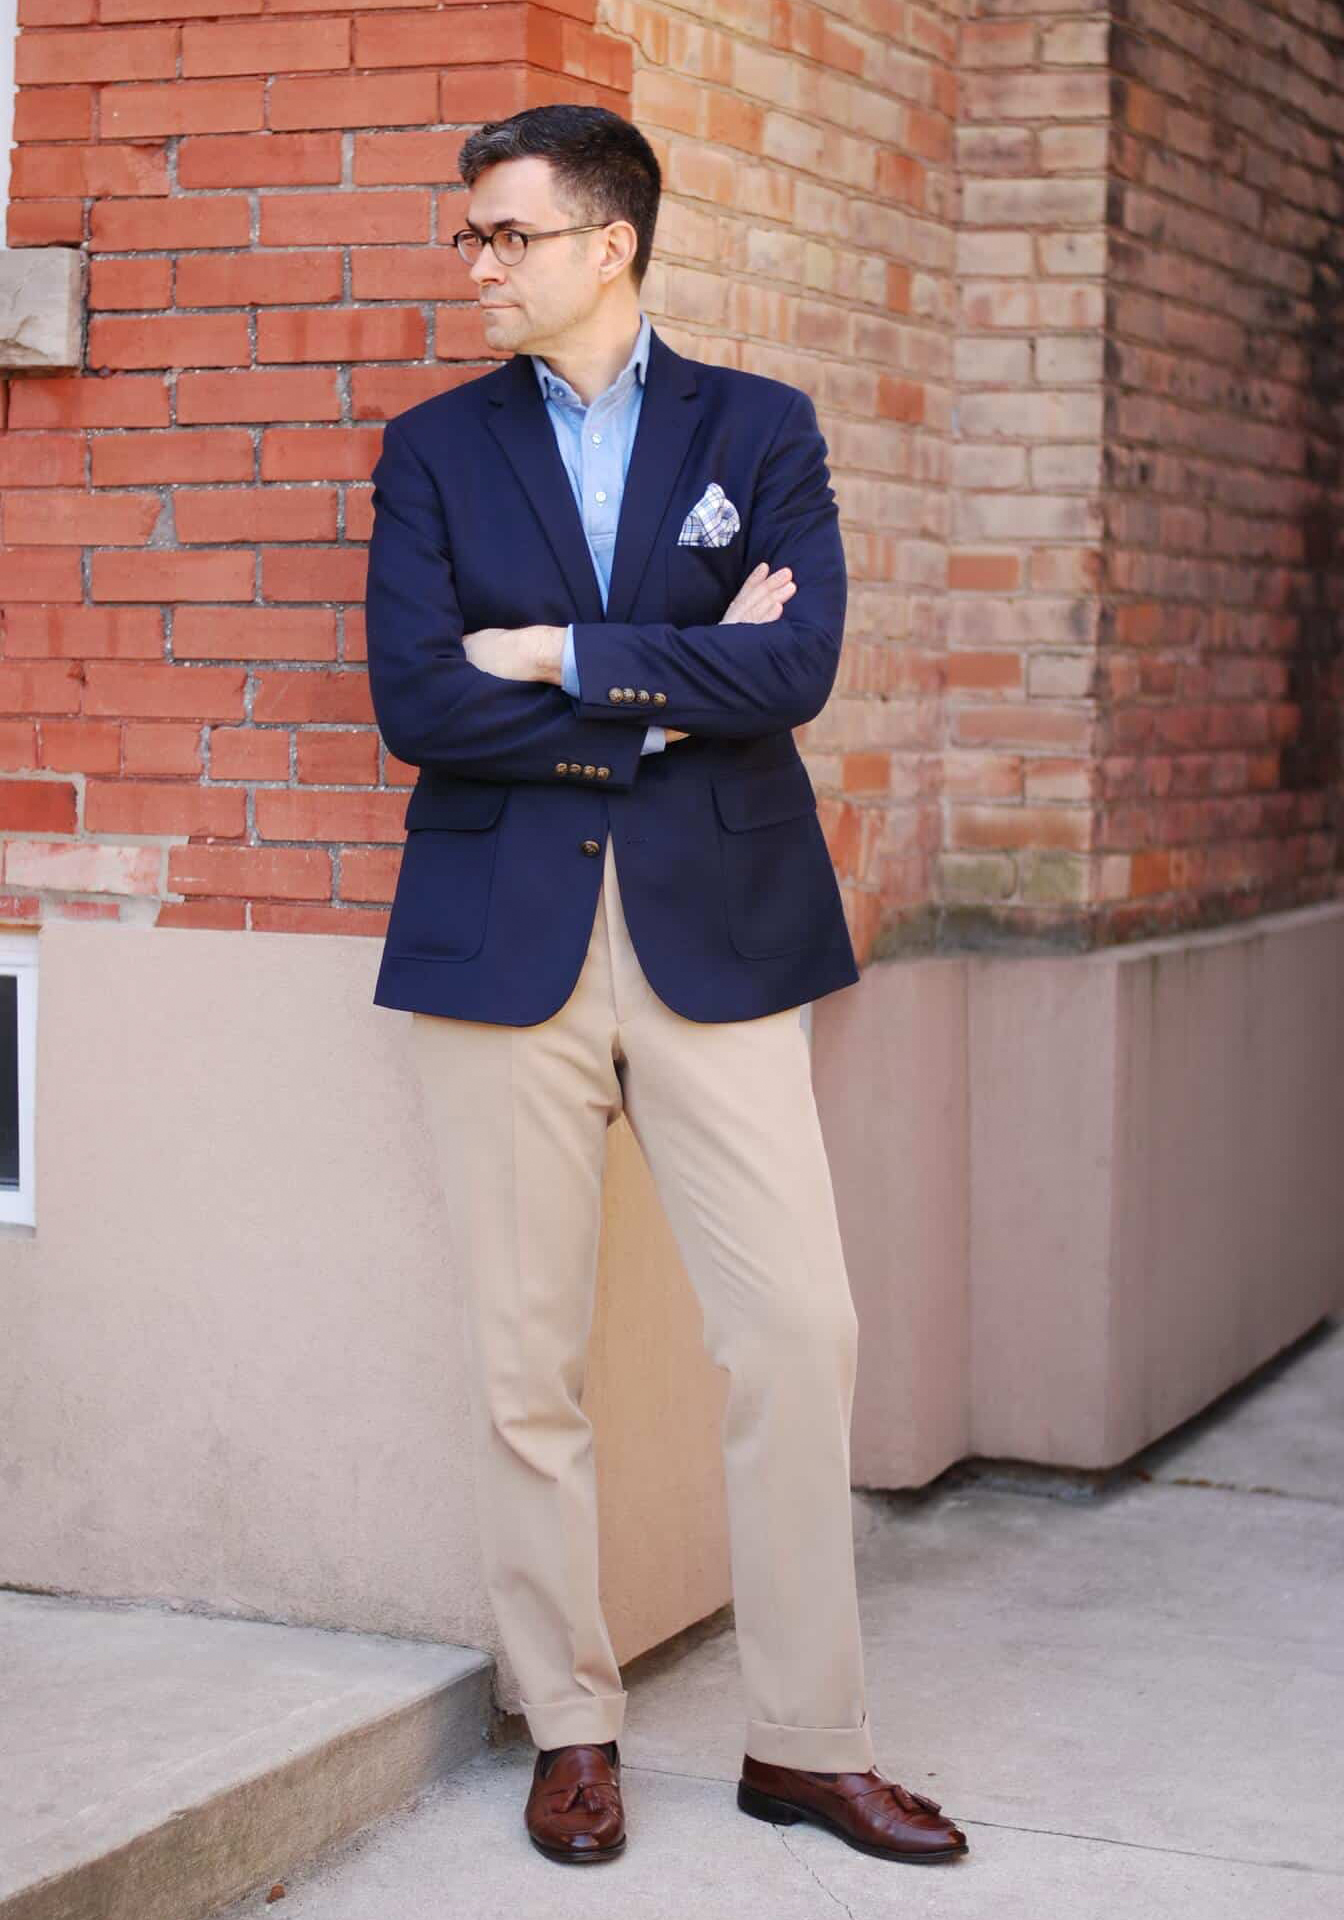 Navy suit jacket, blue shirt, tan pants, and brown shoes